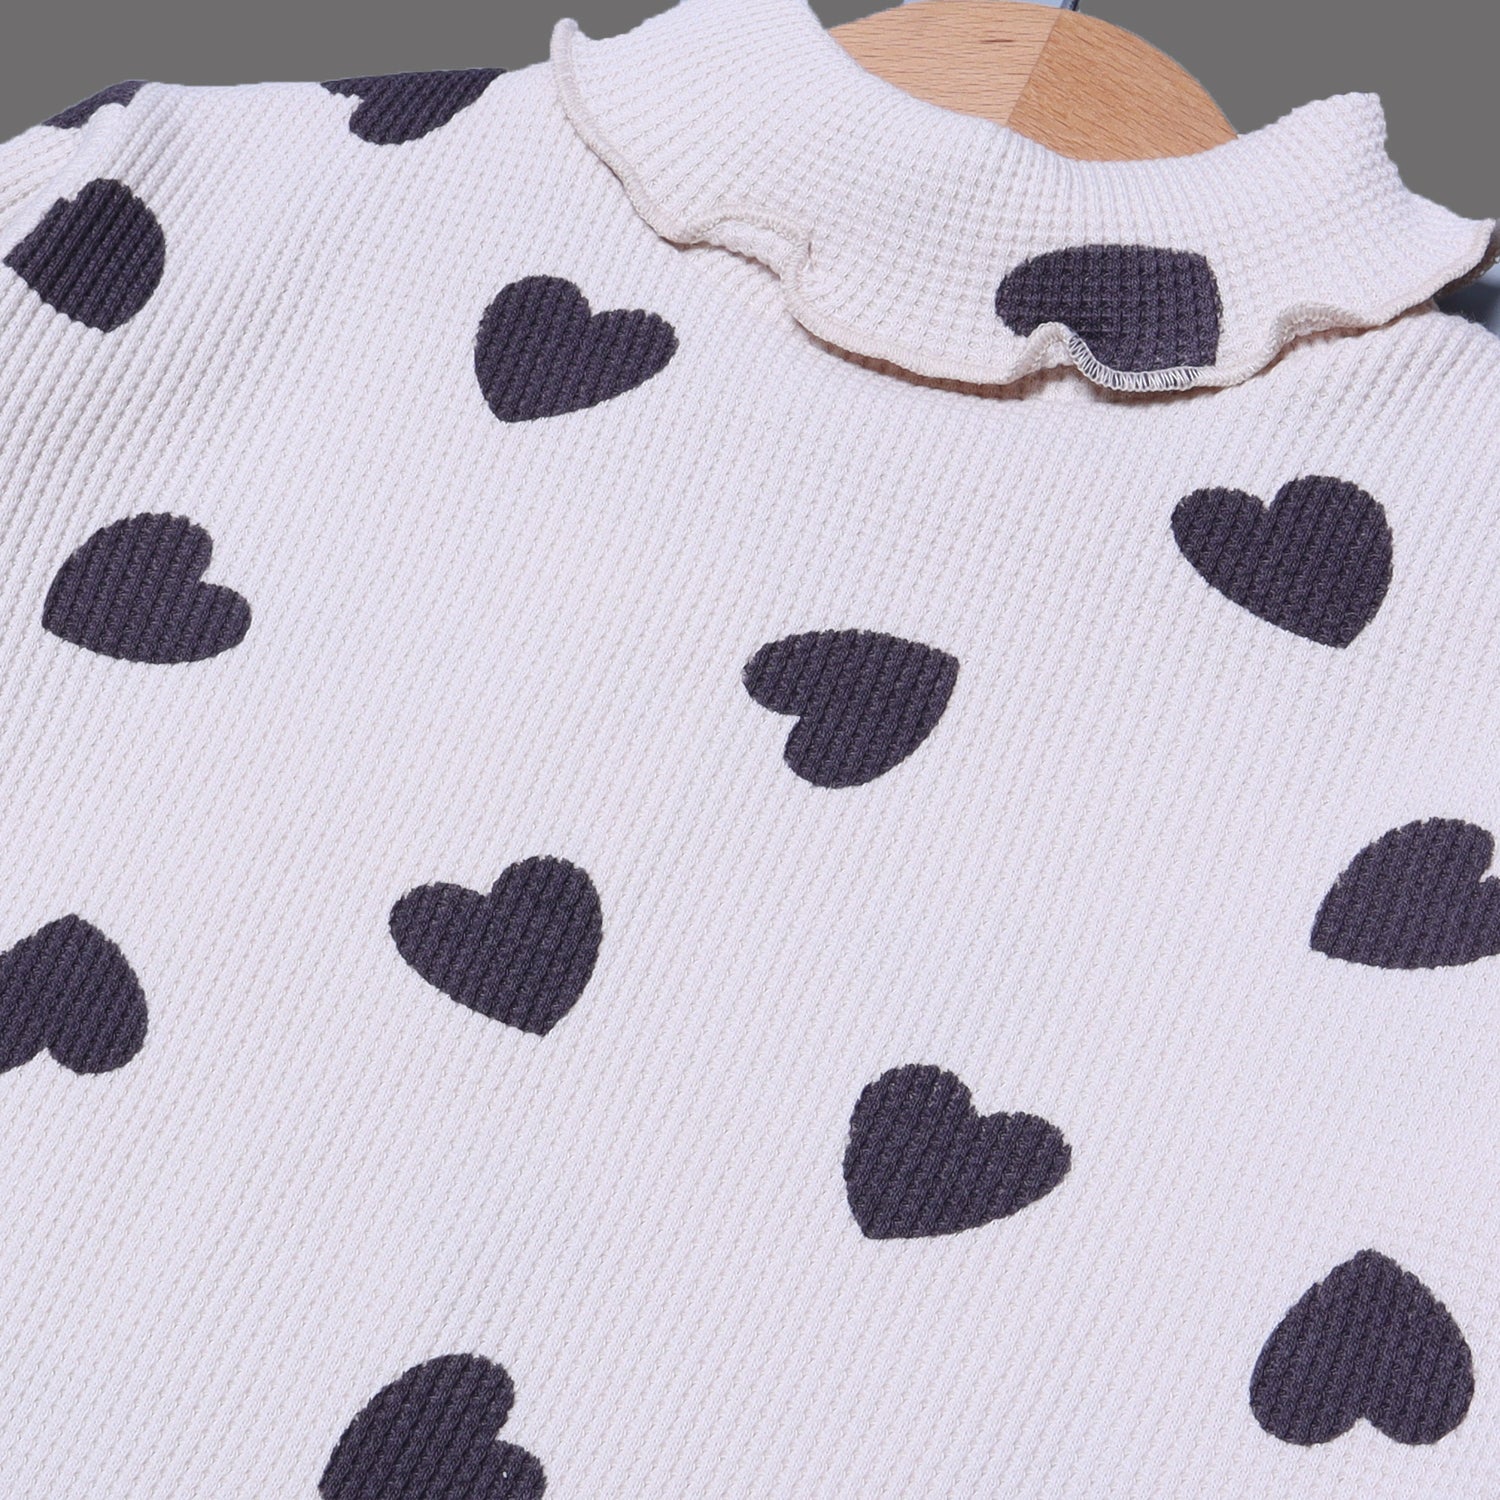 CREAM HIGH NECK & FRIL TROUSER "HEARTS" PRINTED THERMAL FABRIC WINTER SUIT